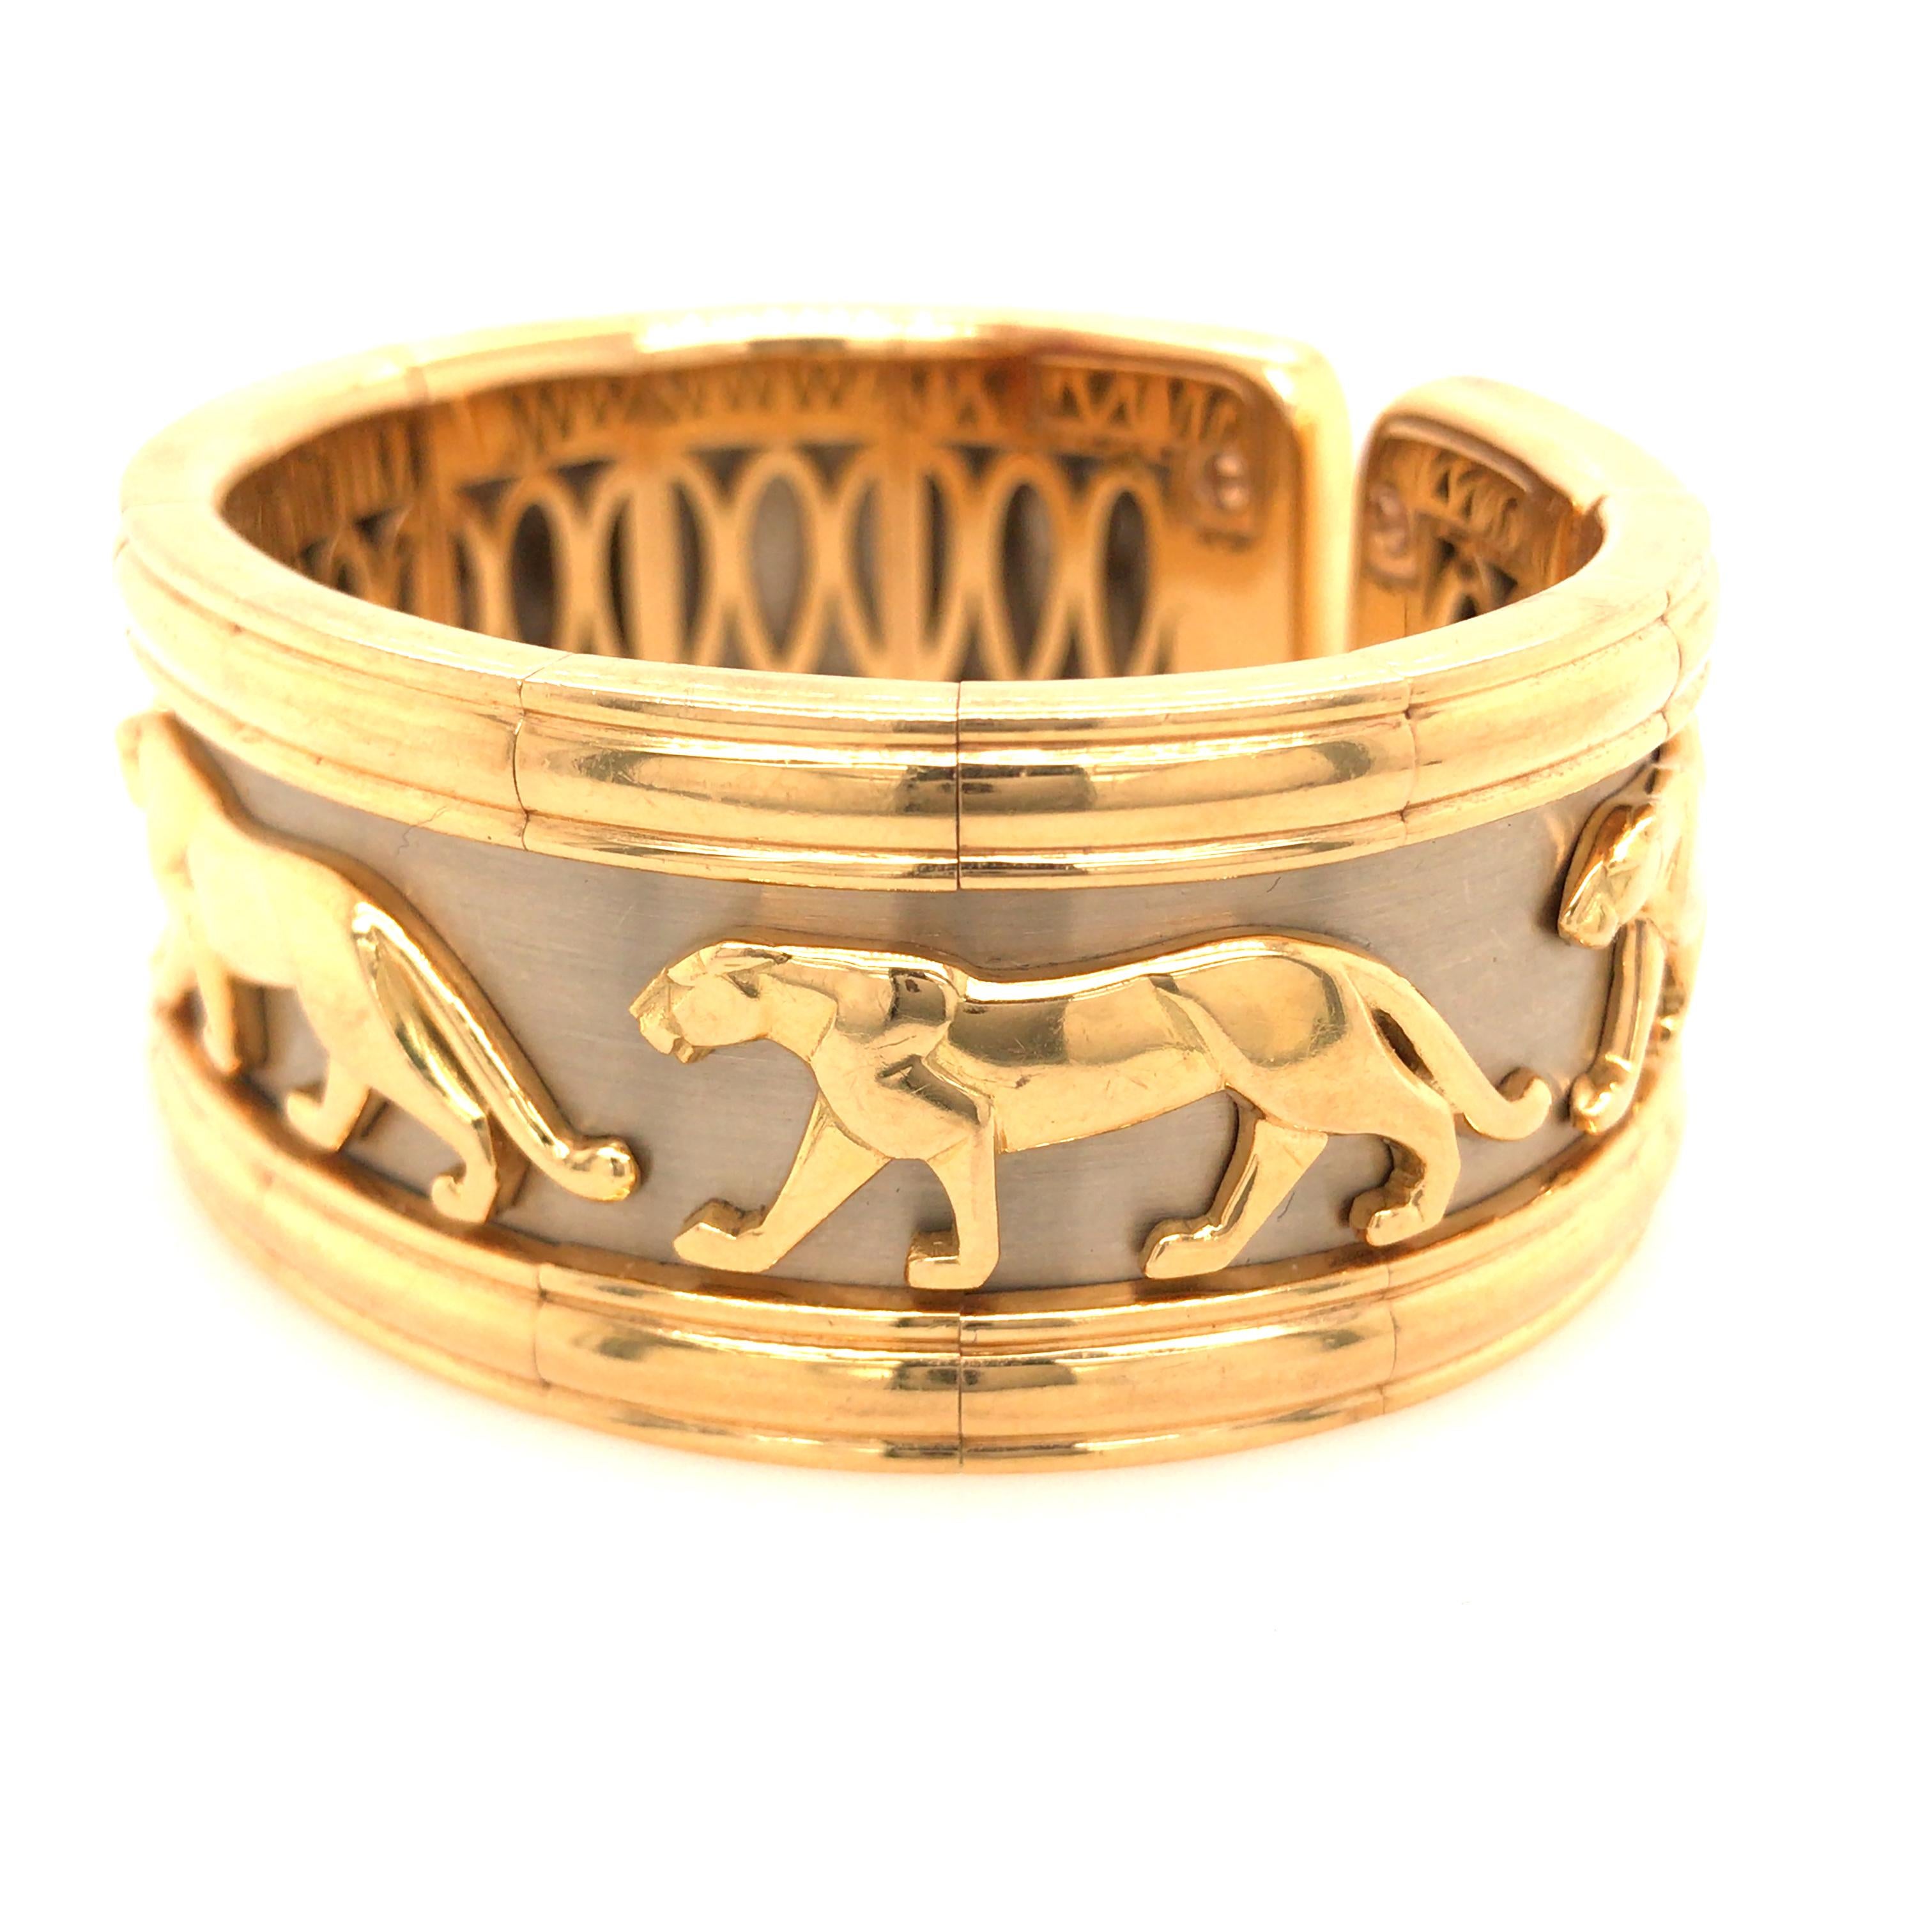 Cartier Panthère Torque 18K Two-Tone Gold Bangle Cuff Bracelet.  The Bracelet measures 1 inch in width and 6 inch in inner circumference.  108 grams.  Slightly flexible.  Signed, stamped 750 and serial number.